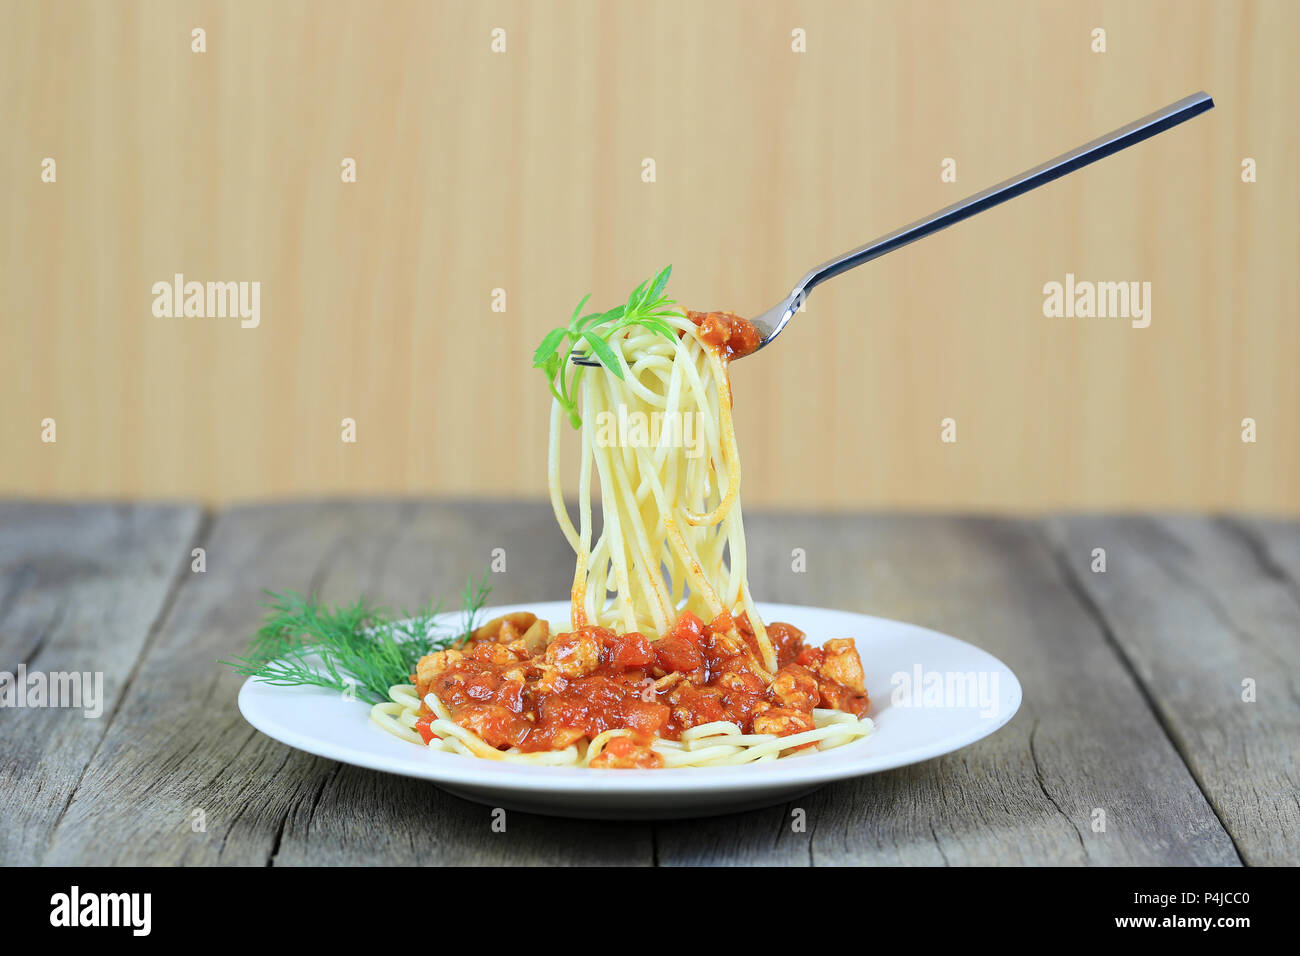 Spaghetti with tomato sauce on silver fork of floating in the white dish on wooden floor,concept of eating good food is health care. Stock Photo